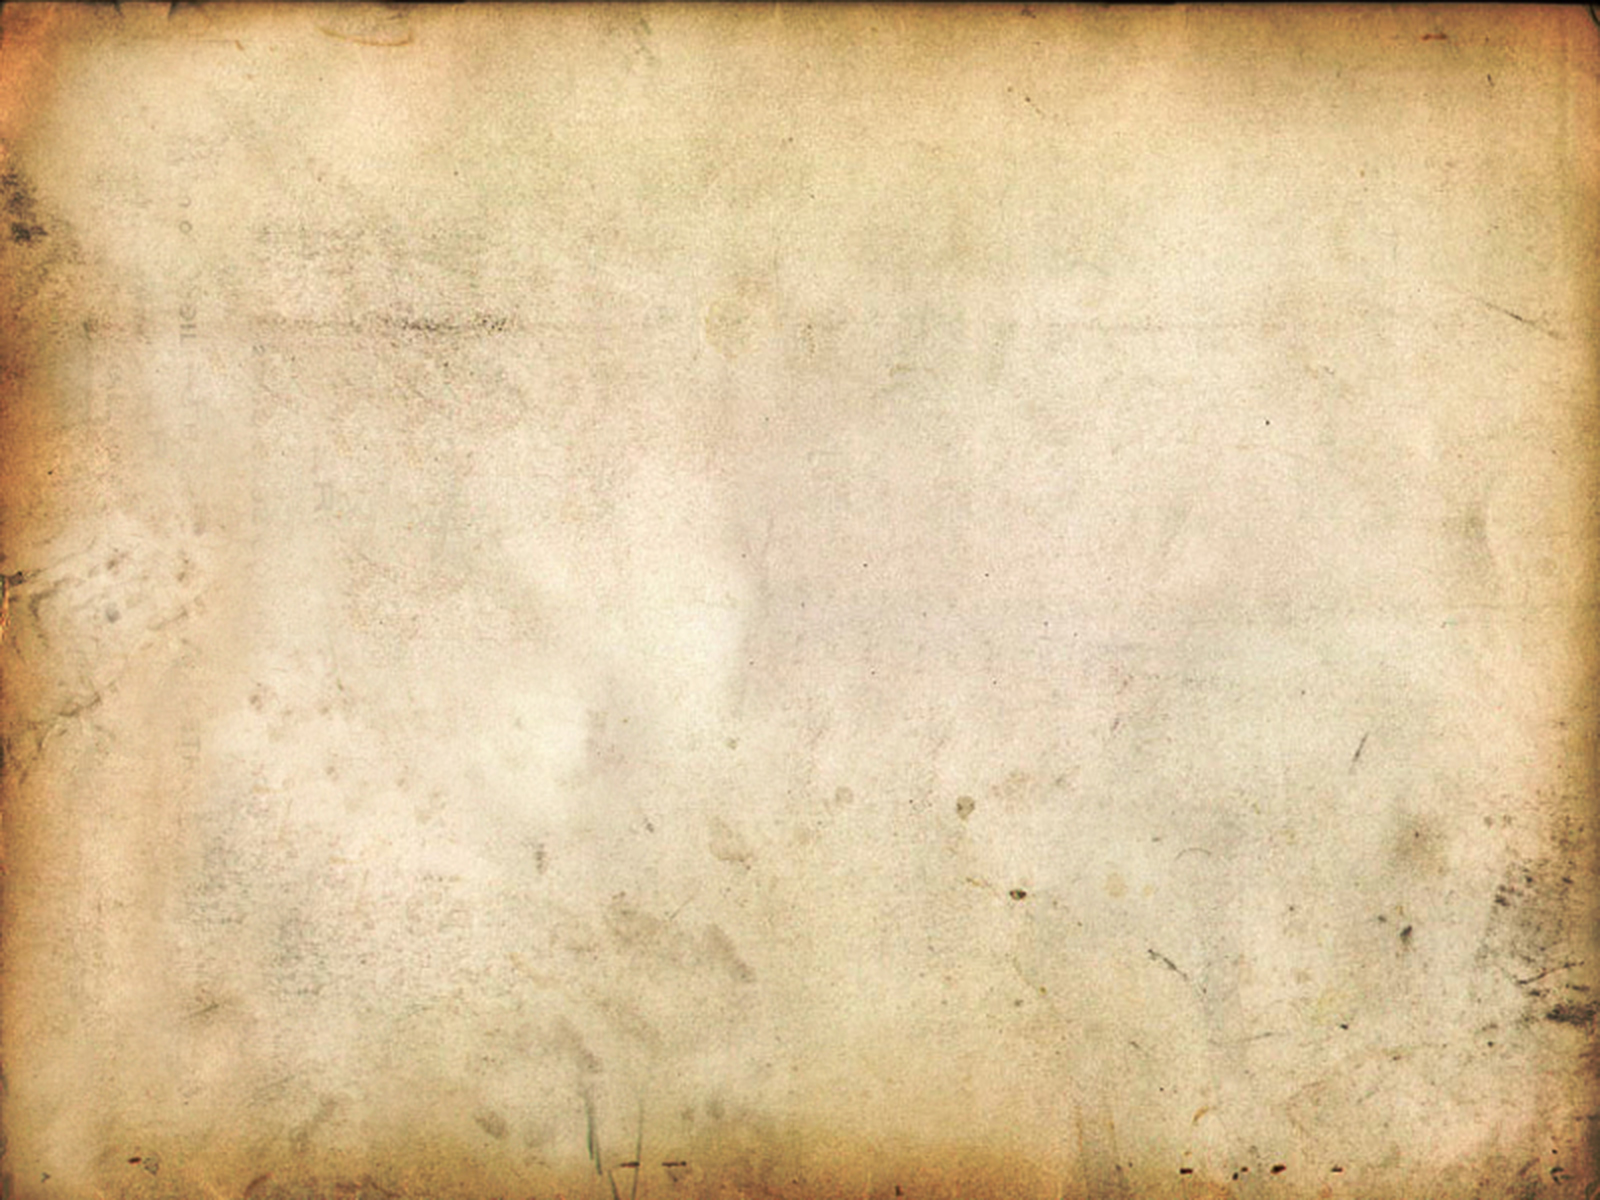 Free download PowerPoint background old paper Vintage style